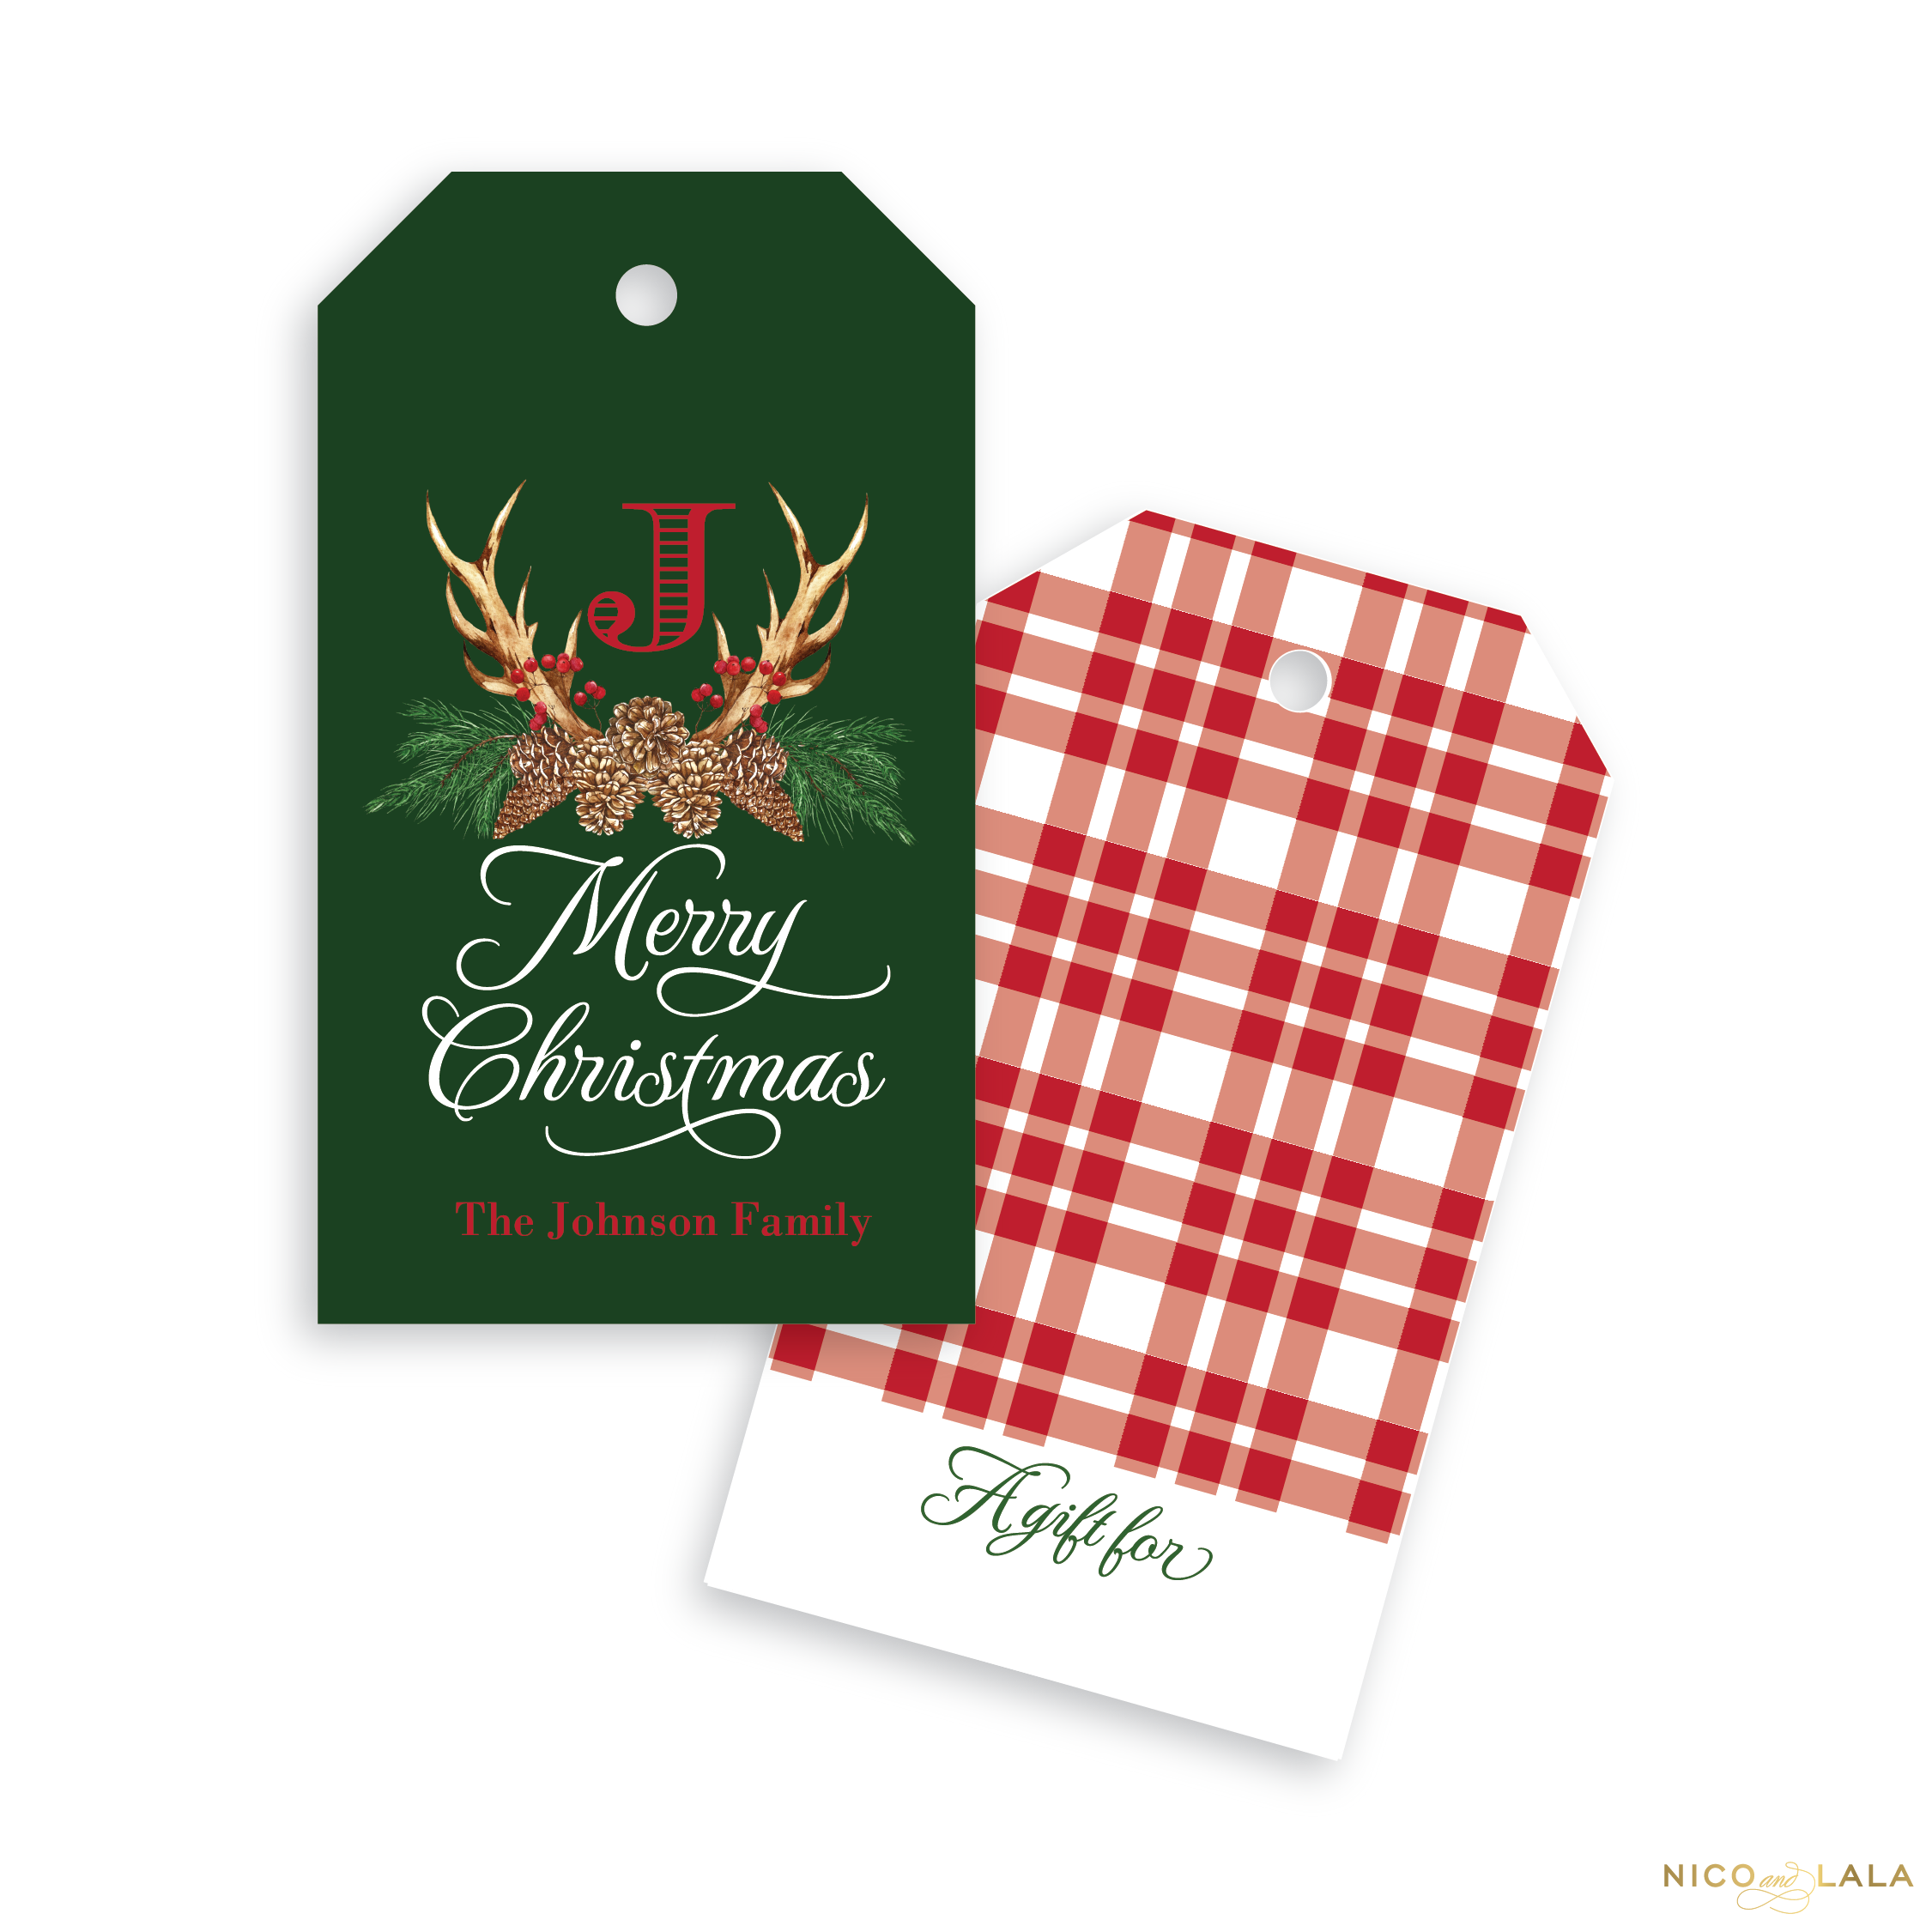 Festive Antlers Christmas Gift Tags